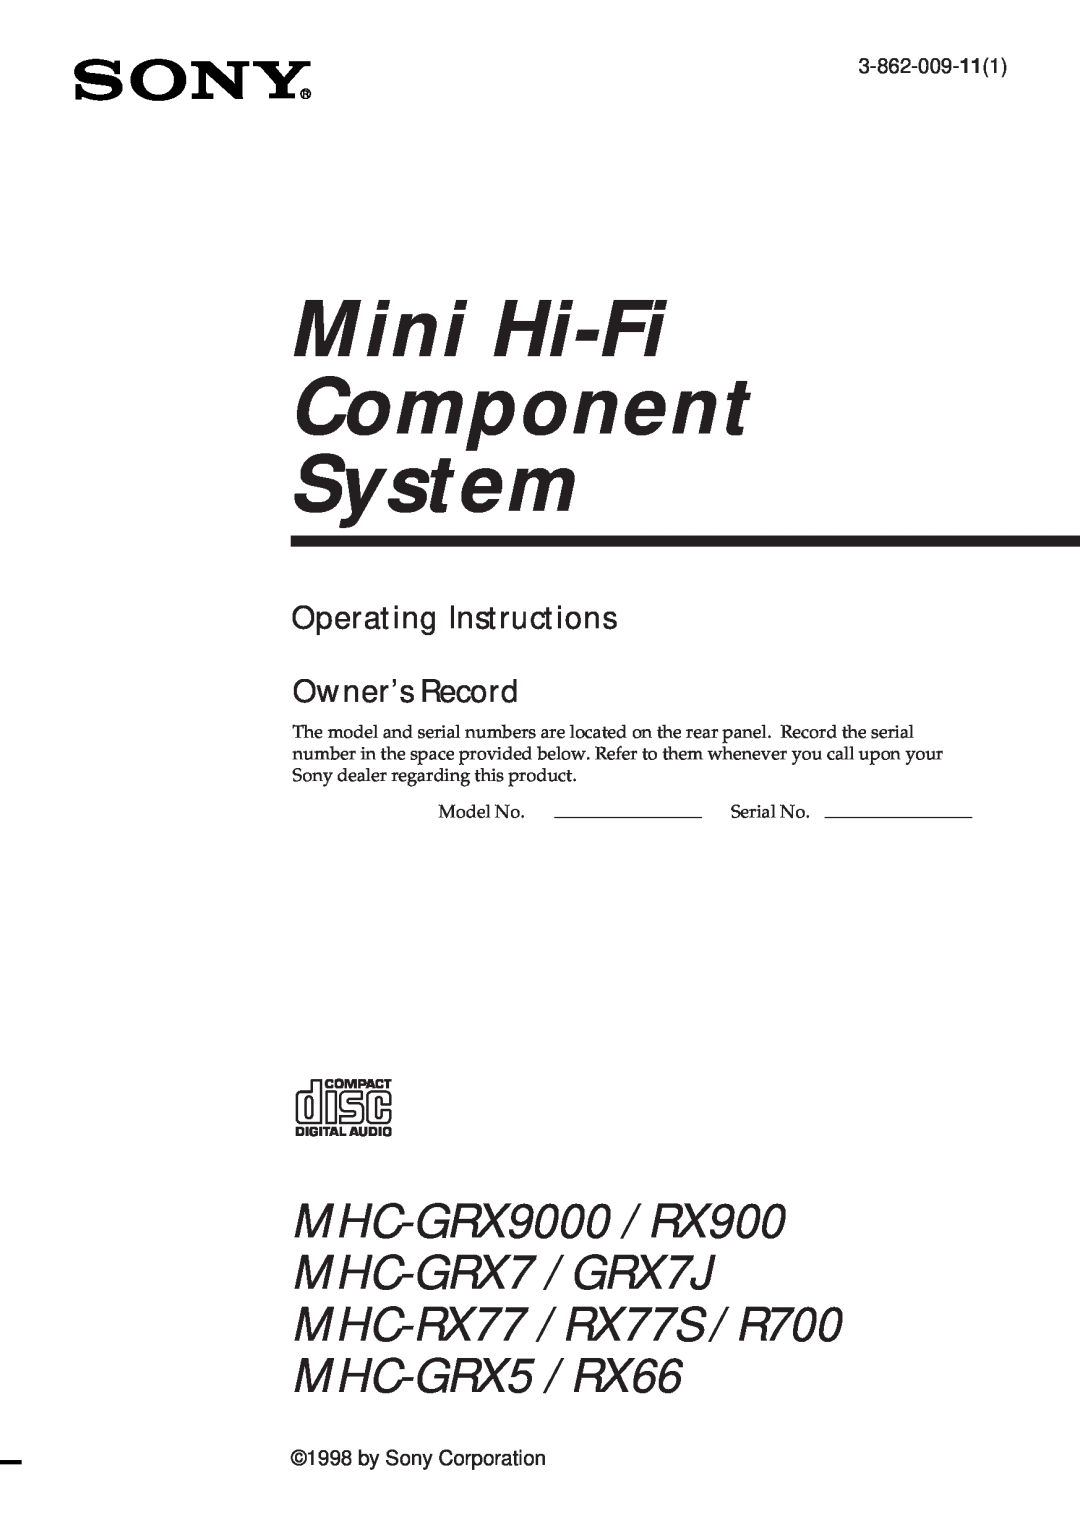 Sony MHC-RX900 manual Mini Hi-Fi Component System, Operating Instructions Owner’s Record, 3-862-009-111 